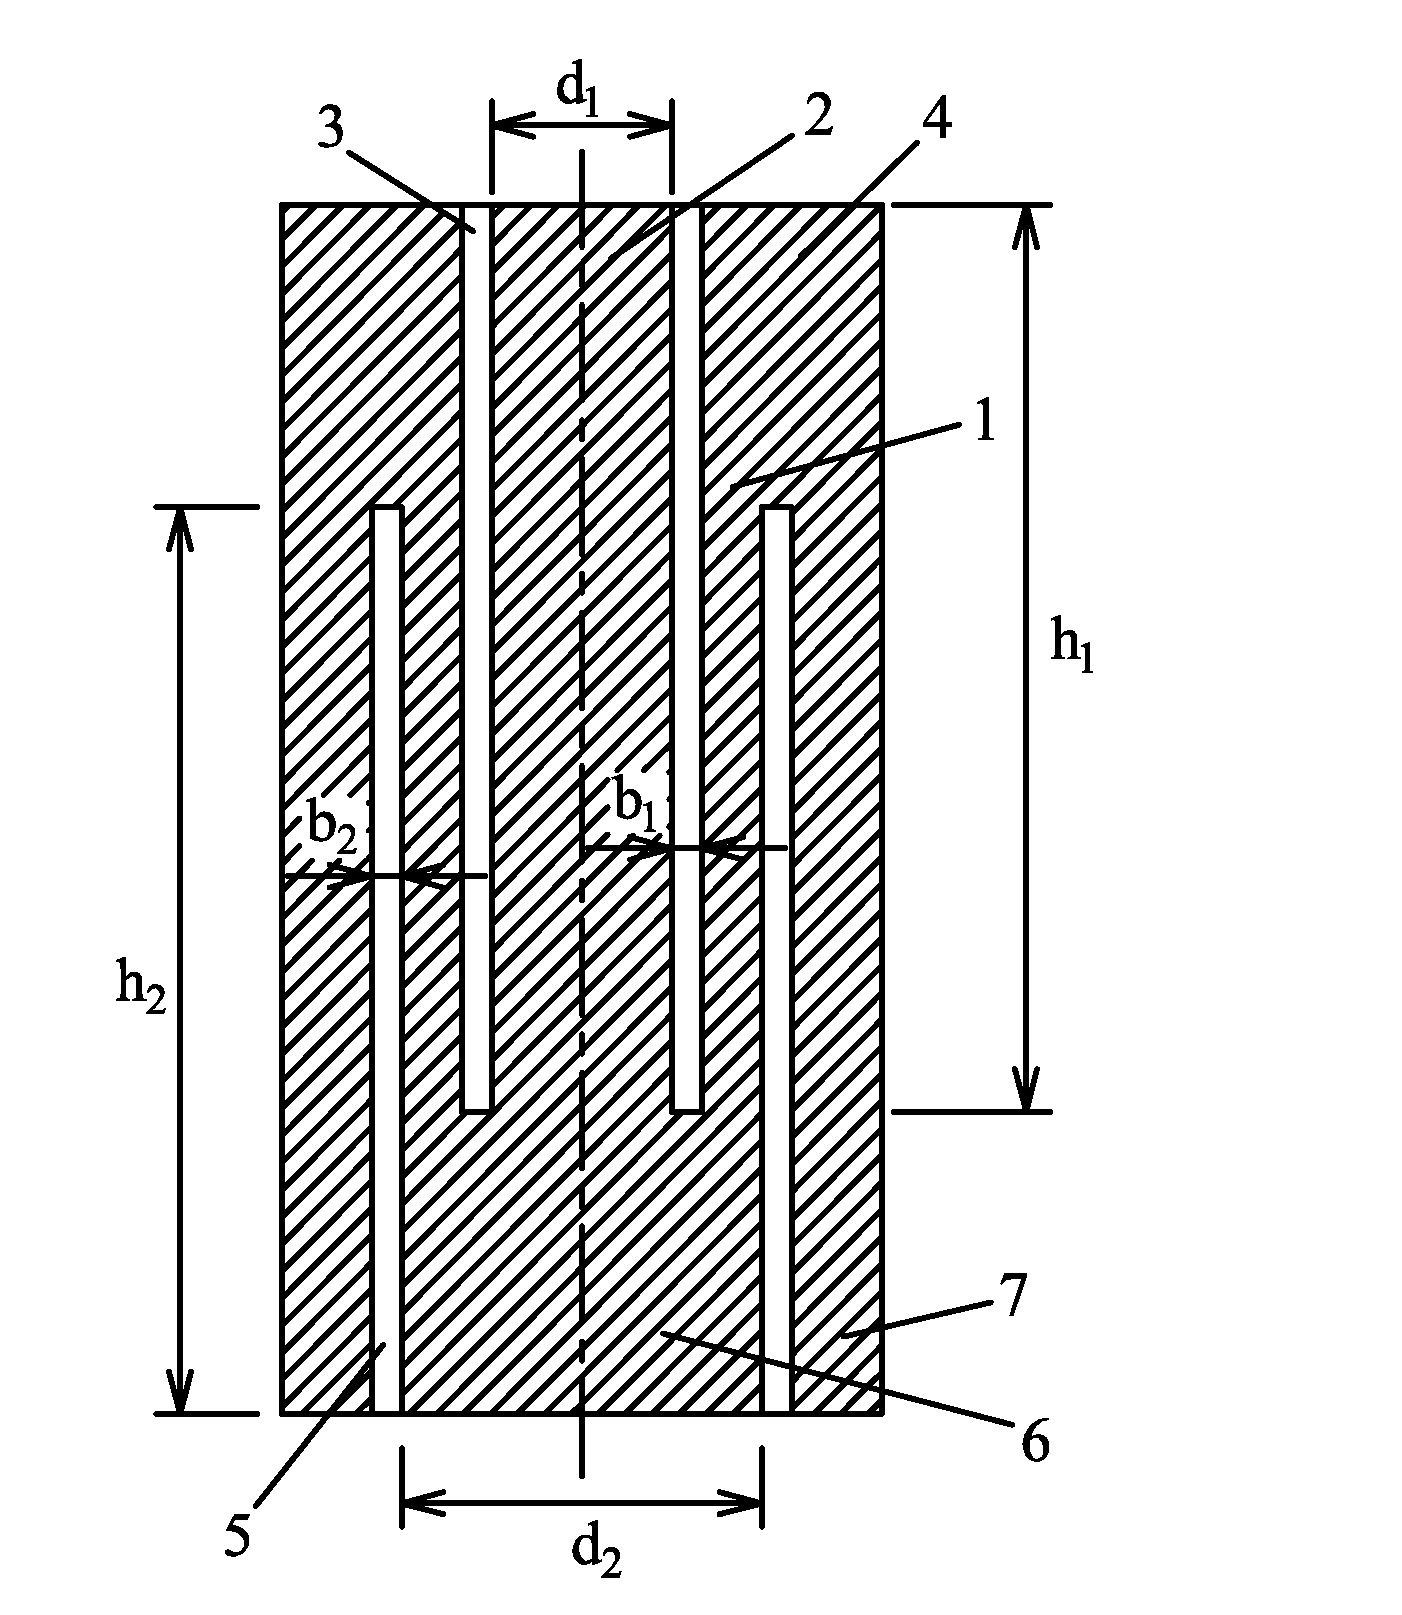 Rock specimen and method for testing direct tensile strength of the same